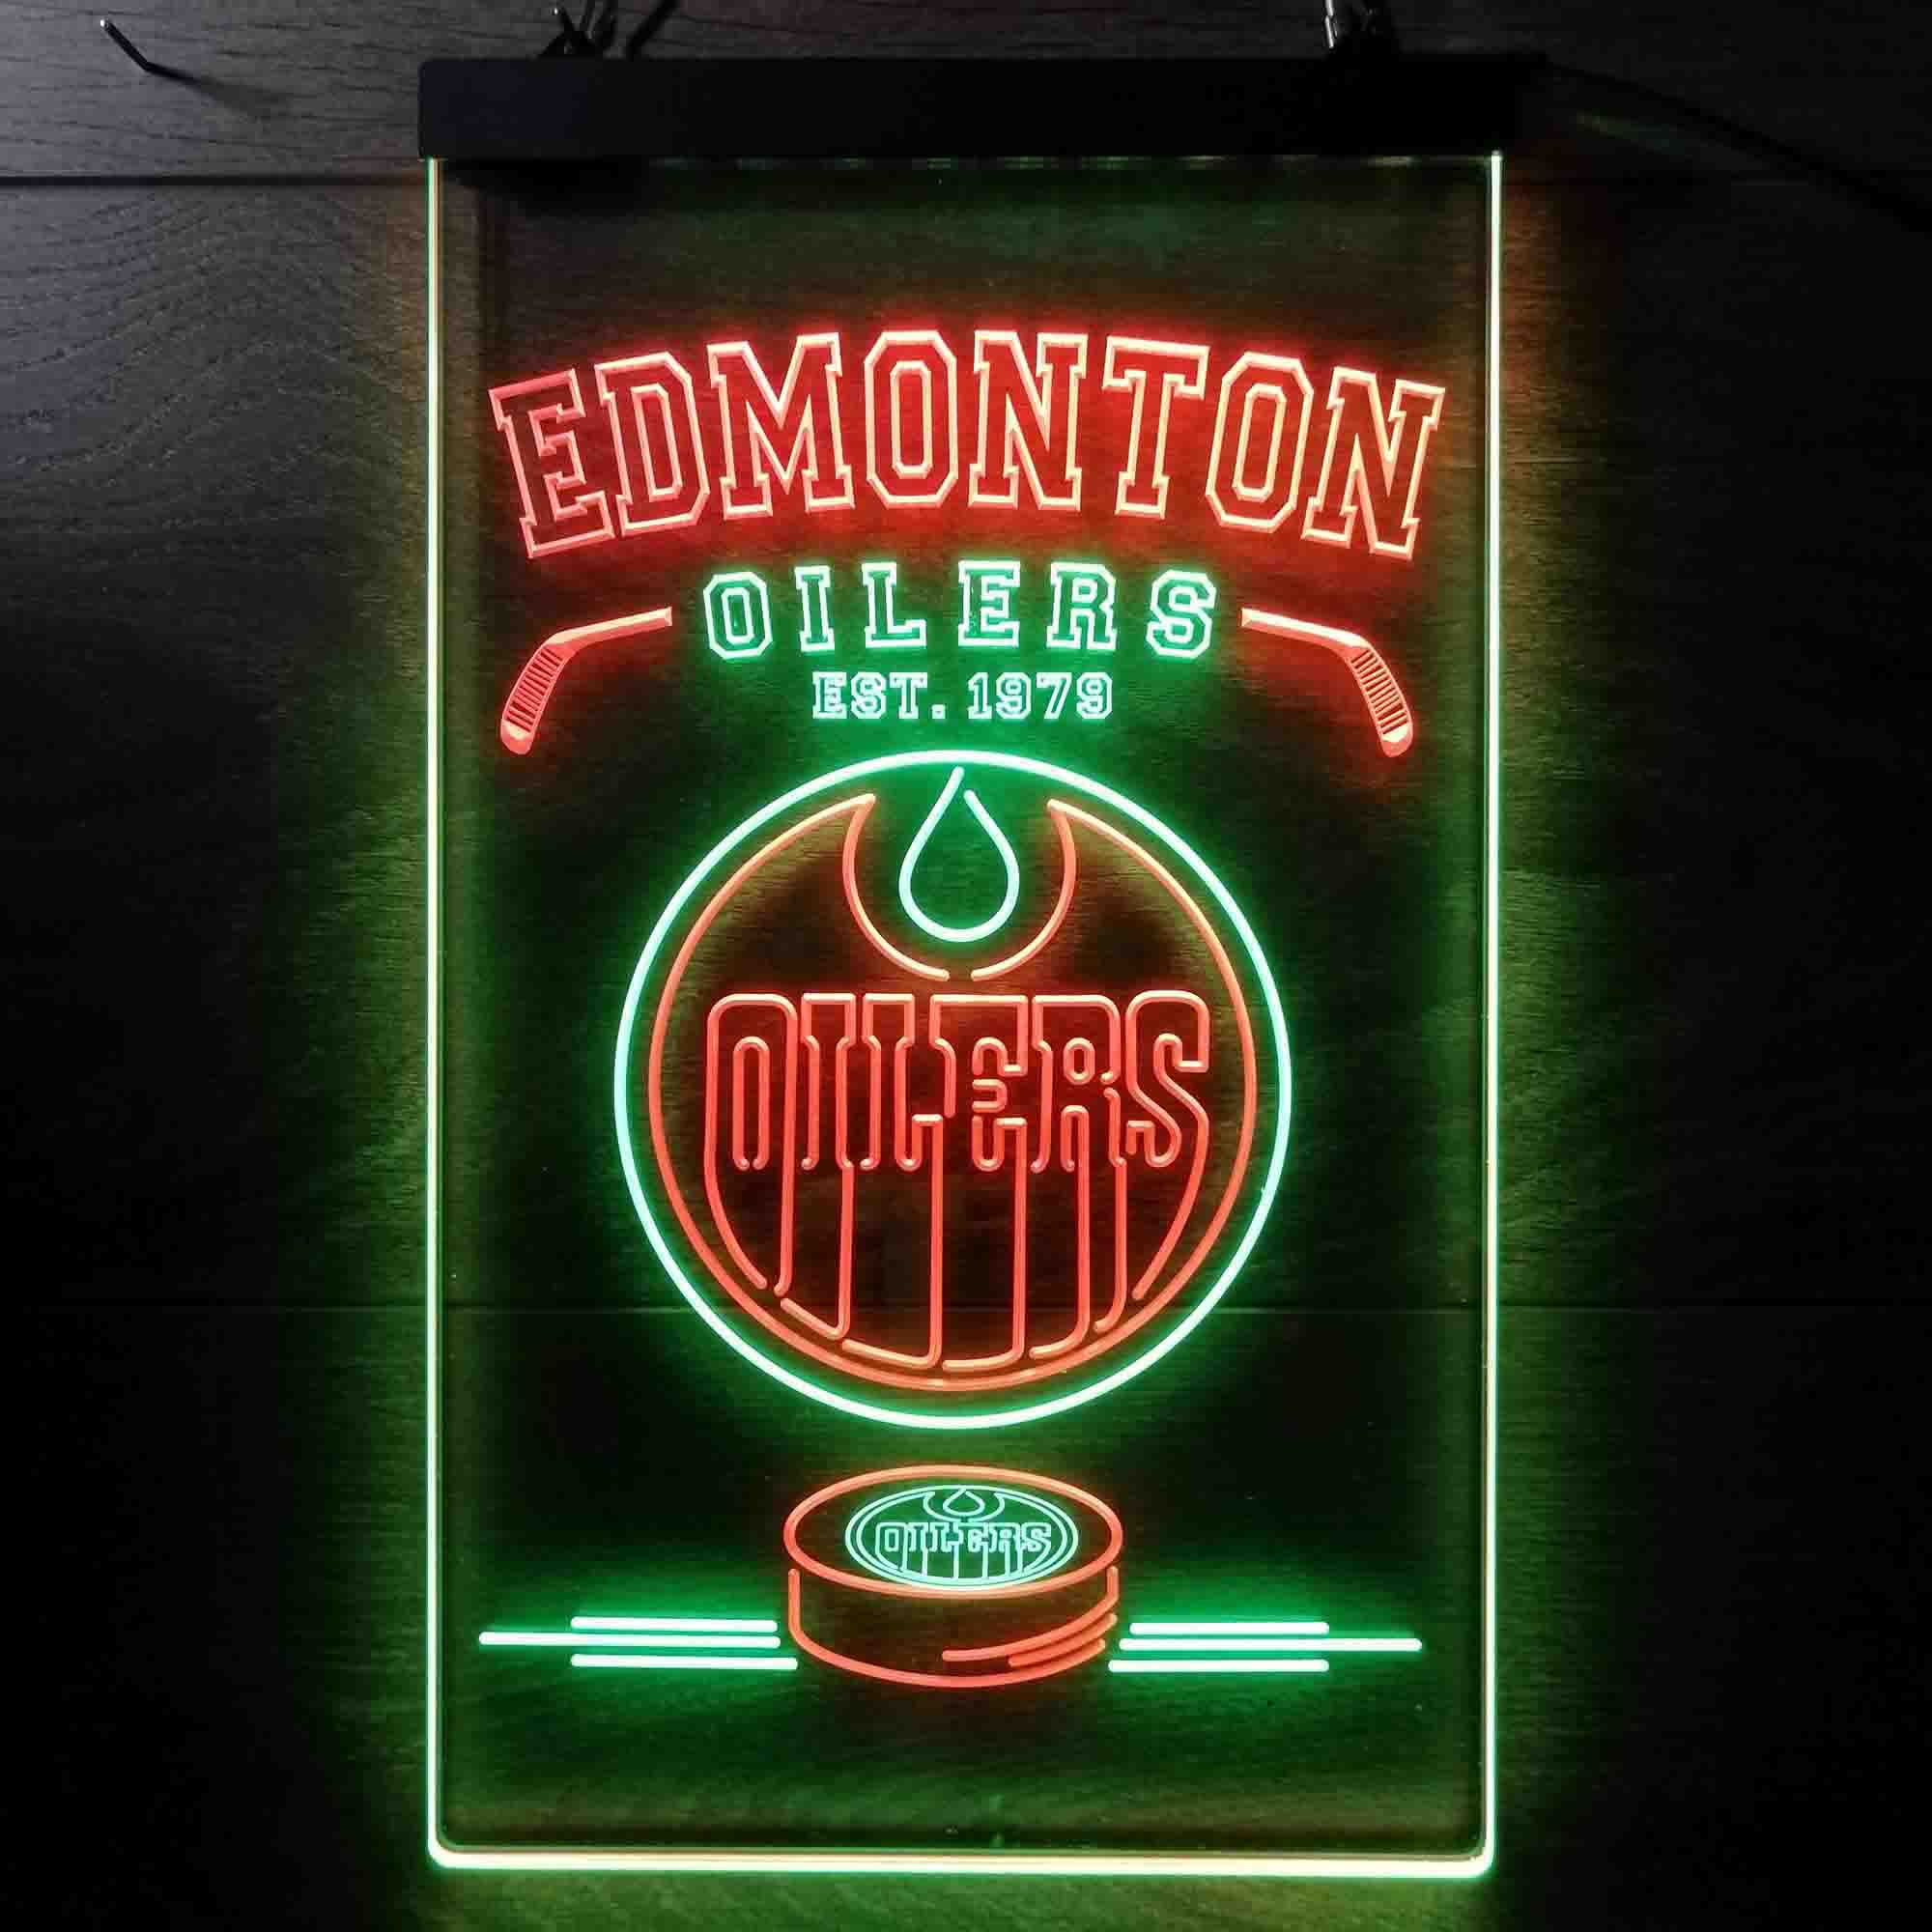 Custom Edmonton Oilers Est. 1979 NHL Neon-Like LED Sign - Father's Day Gift - ProLedSign